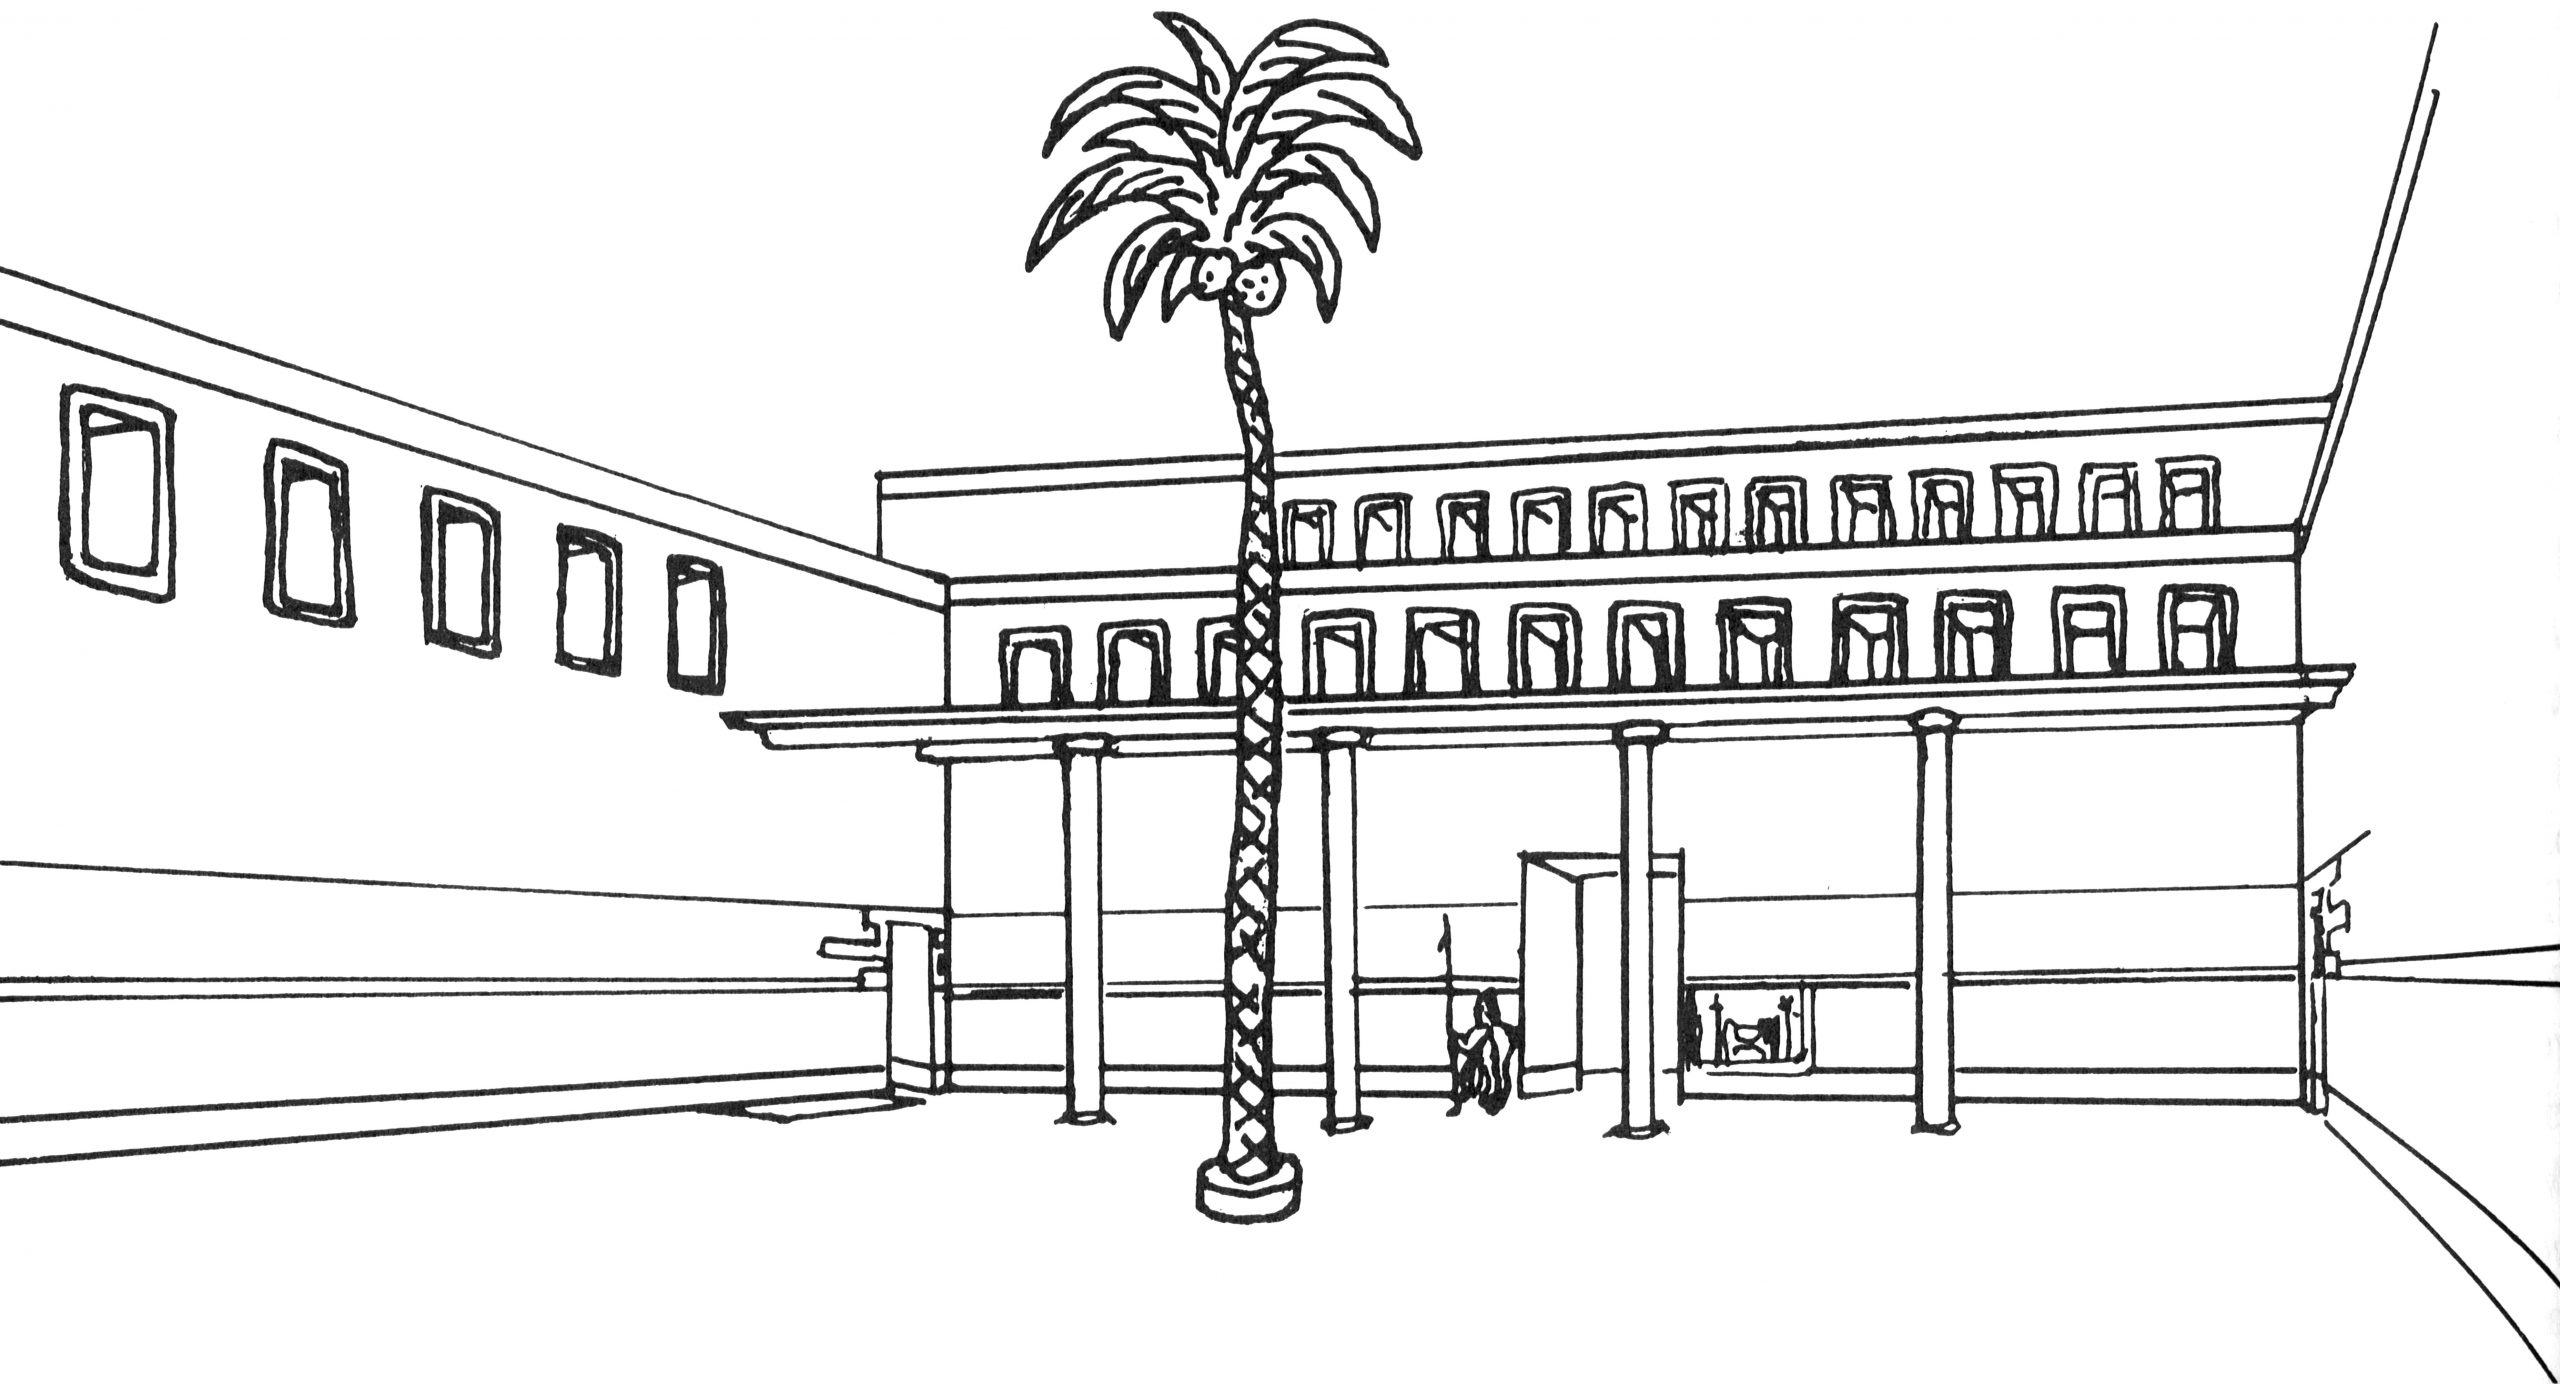 Margueron’s reconstruction of the Court of the Palm with an artificial tree